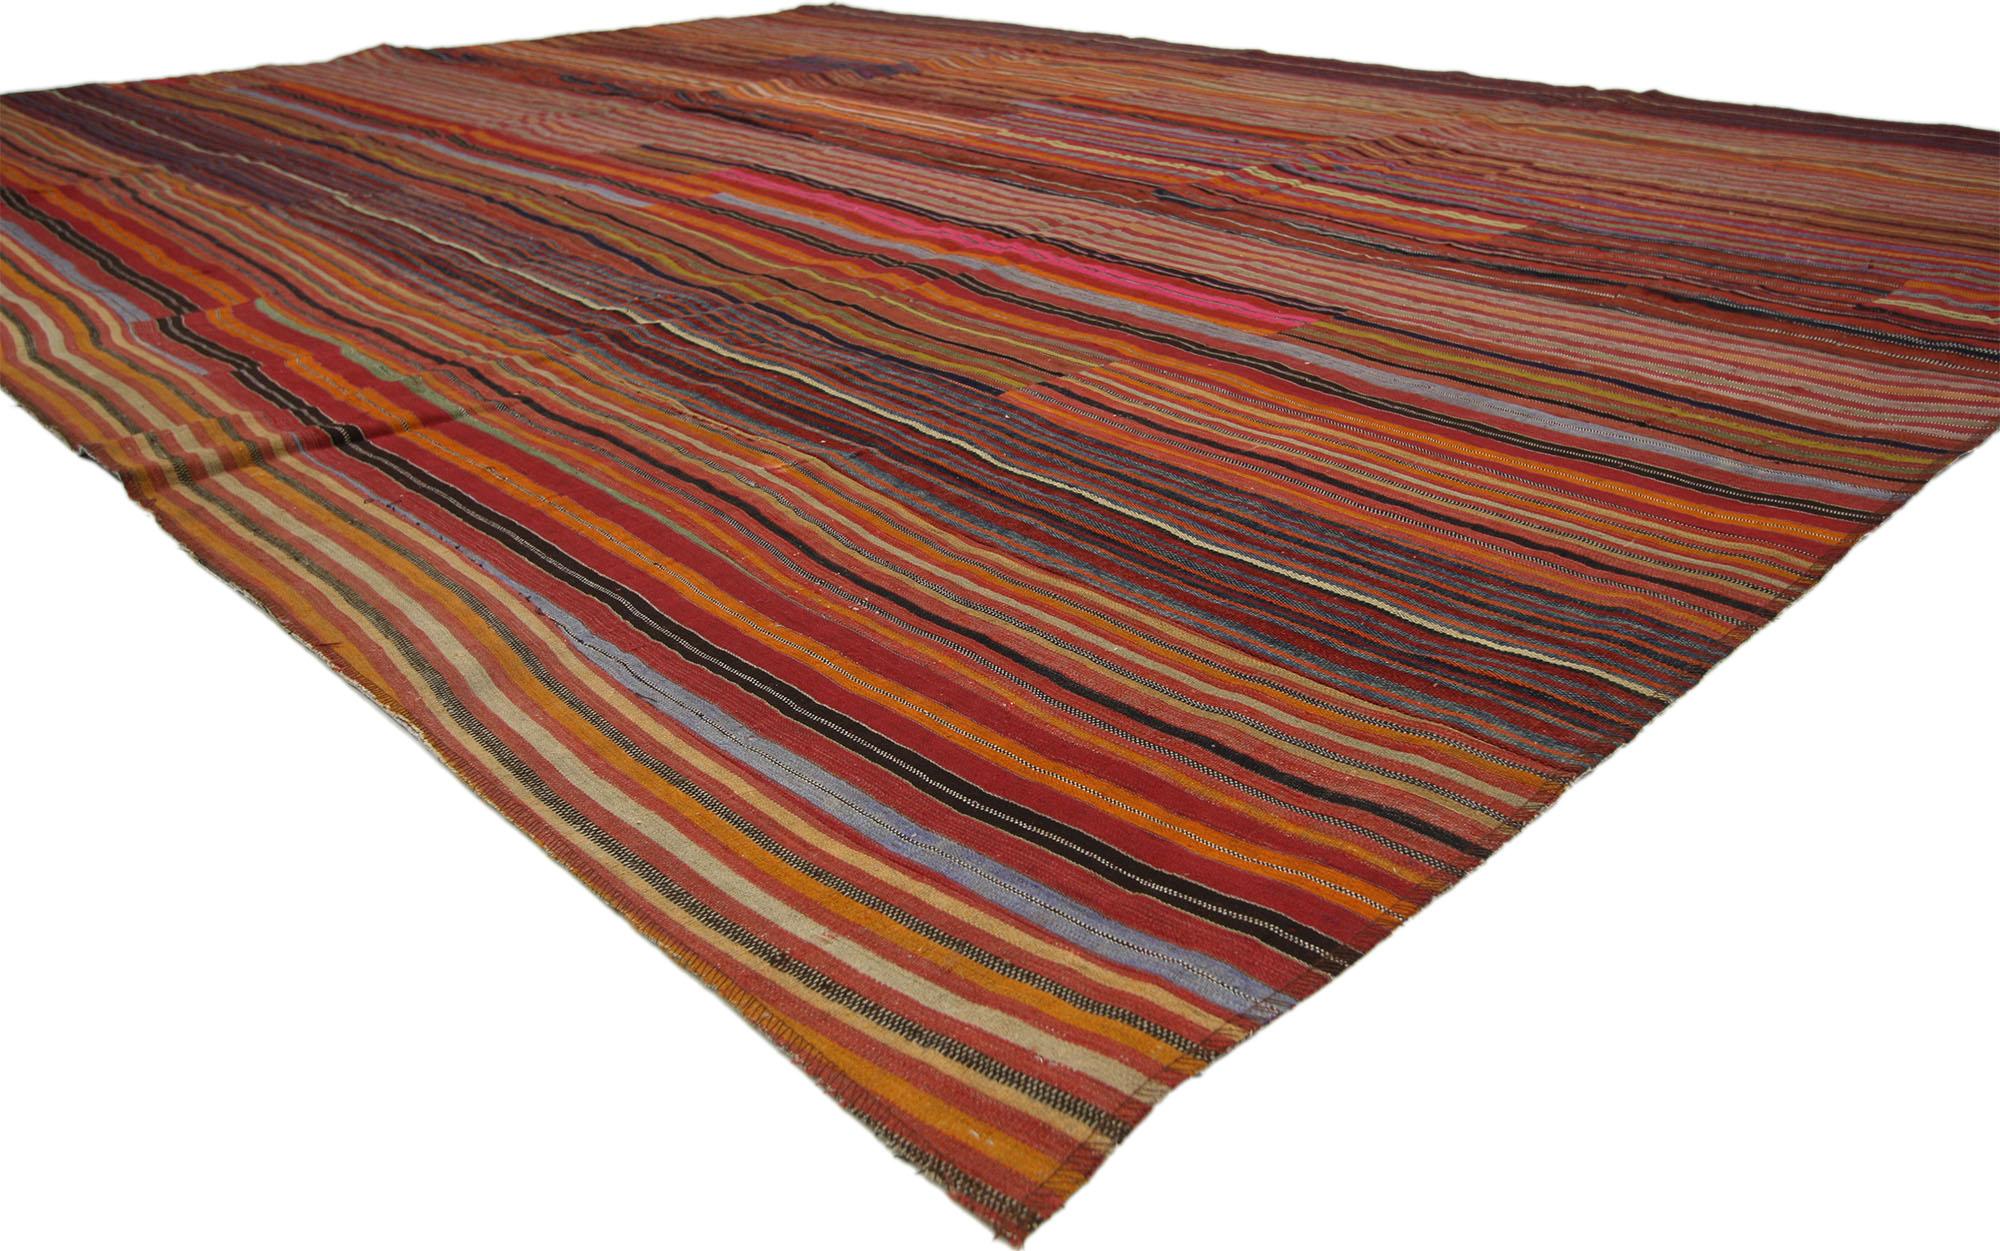 60647 Distressed Vintage Turkish Striped Kilim Rug, 08'08 x 11'05. 
Weathered charm and rugged beauty collides with rustic sensibility in this handwoven wool vintage Turkish kilim rug. The striped panel design and lively colors woven into this piece